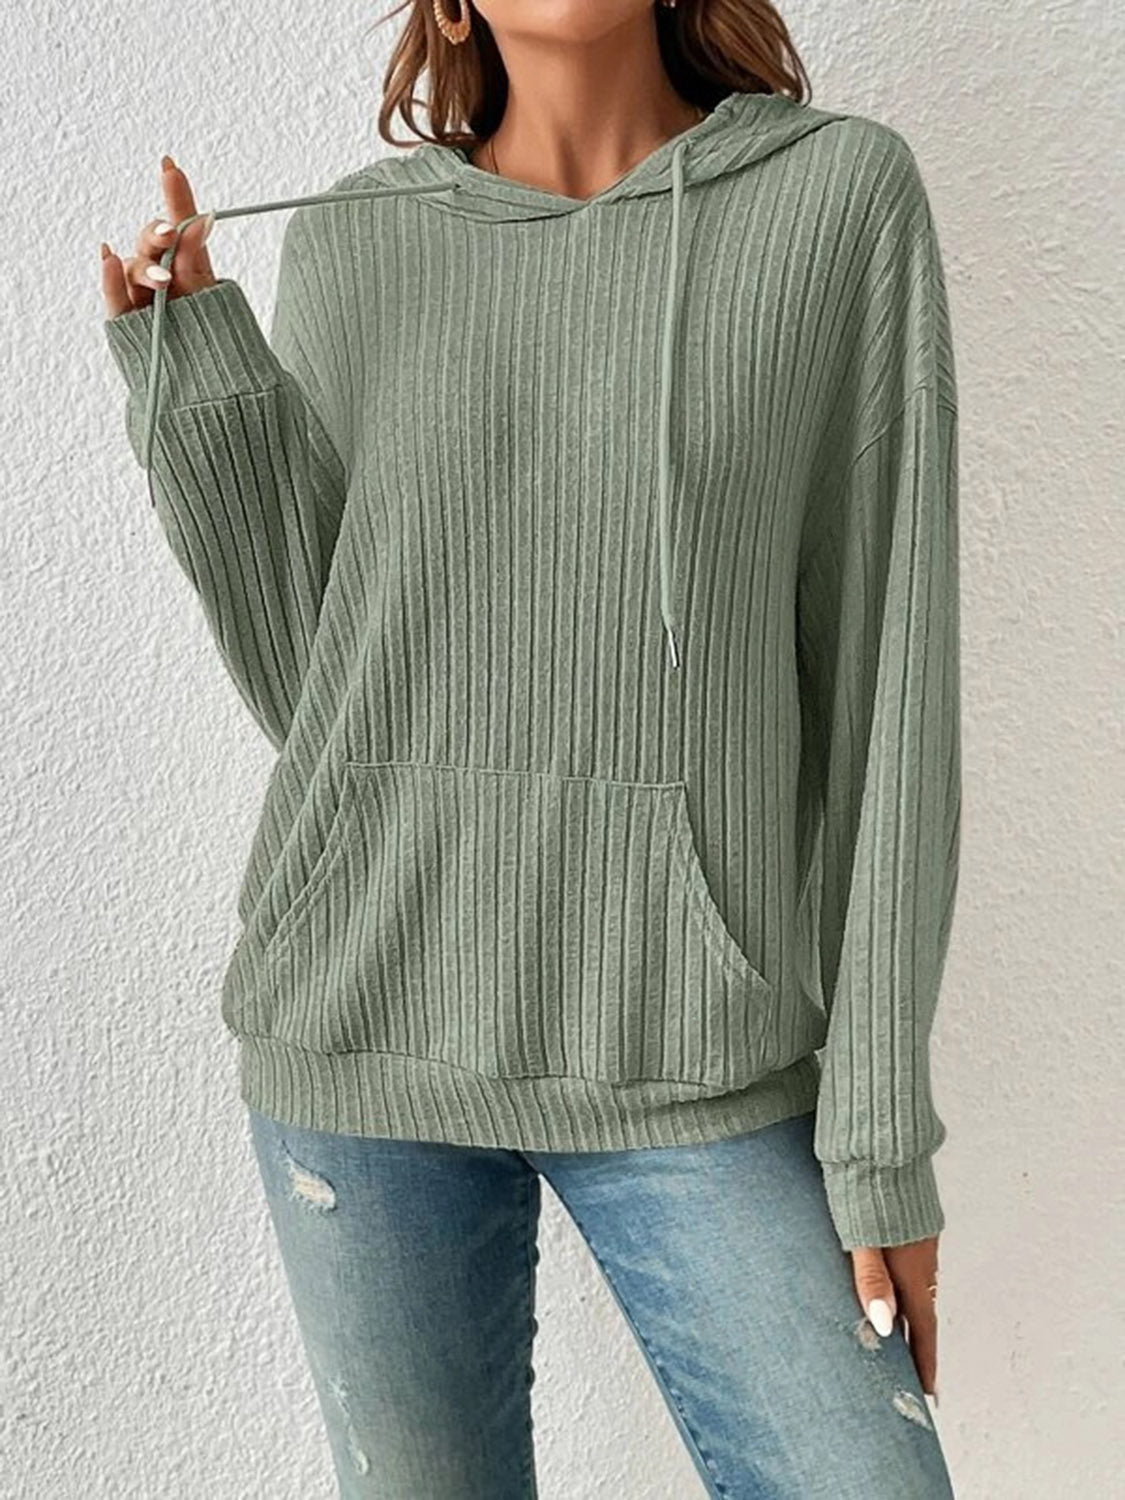 Ribbed Dropped Shoulder Drawstring Hoodie - Fashion Girl Online Store